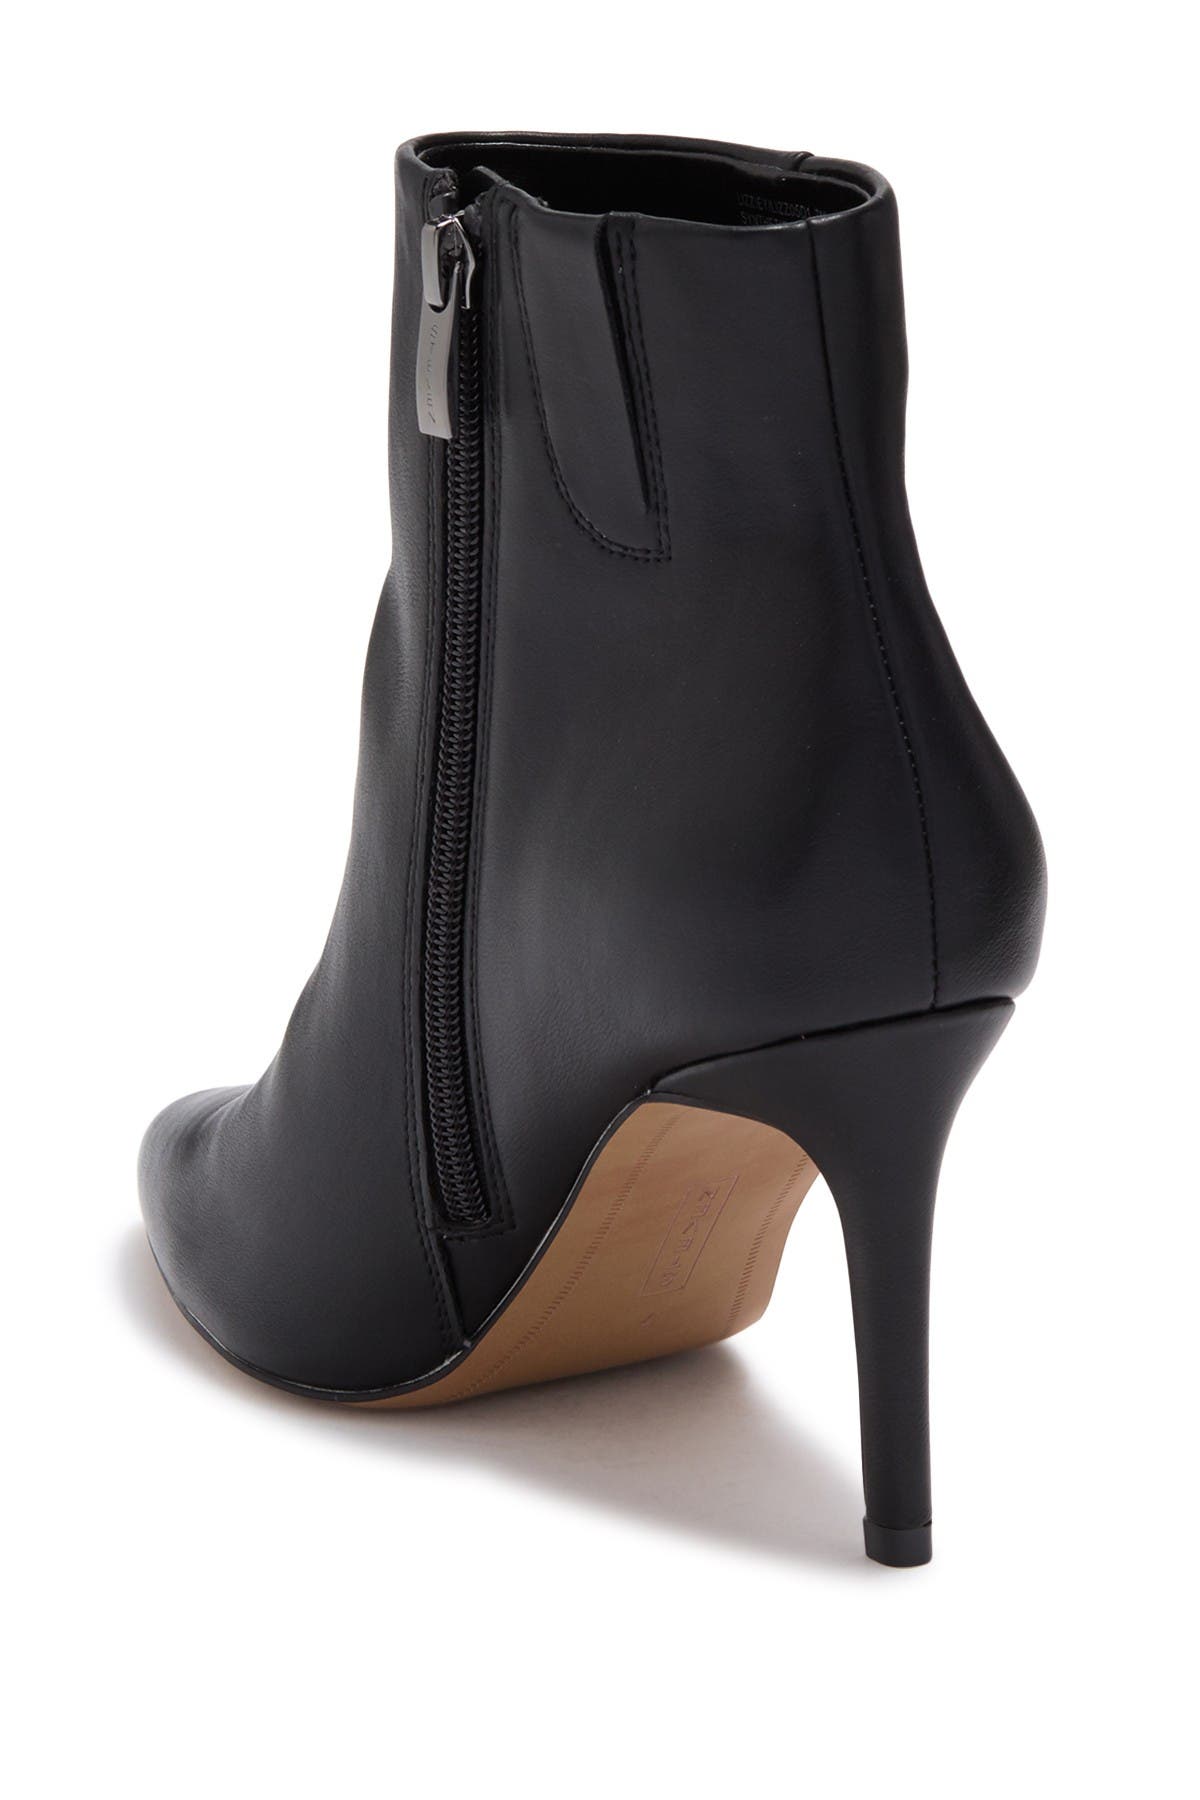 Steve Madden | Lizziey Pointed Toe Bootie | Nordstrom Rack